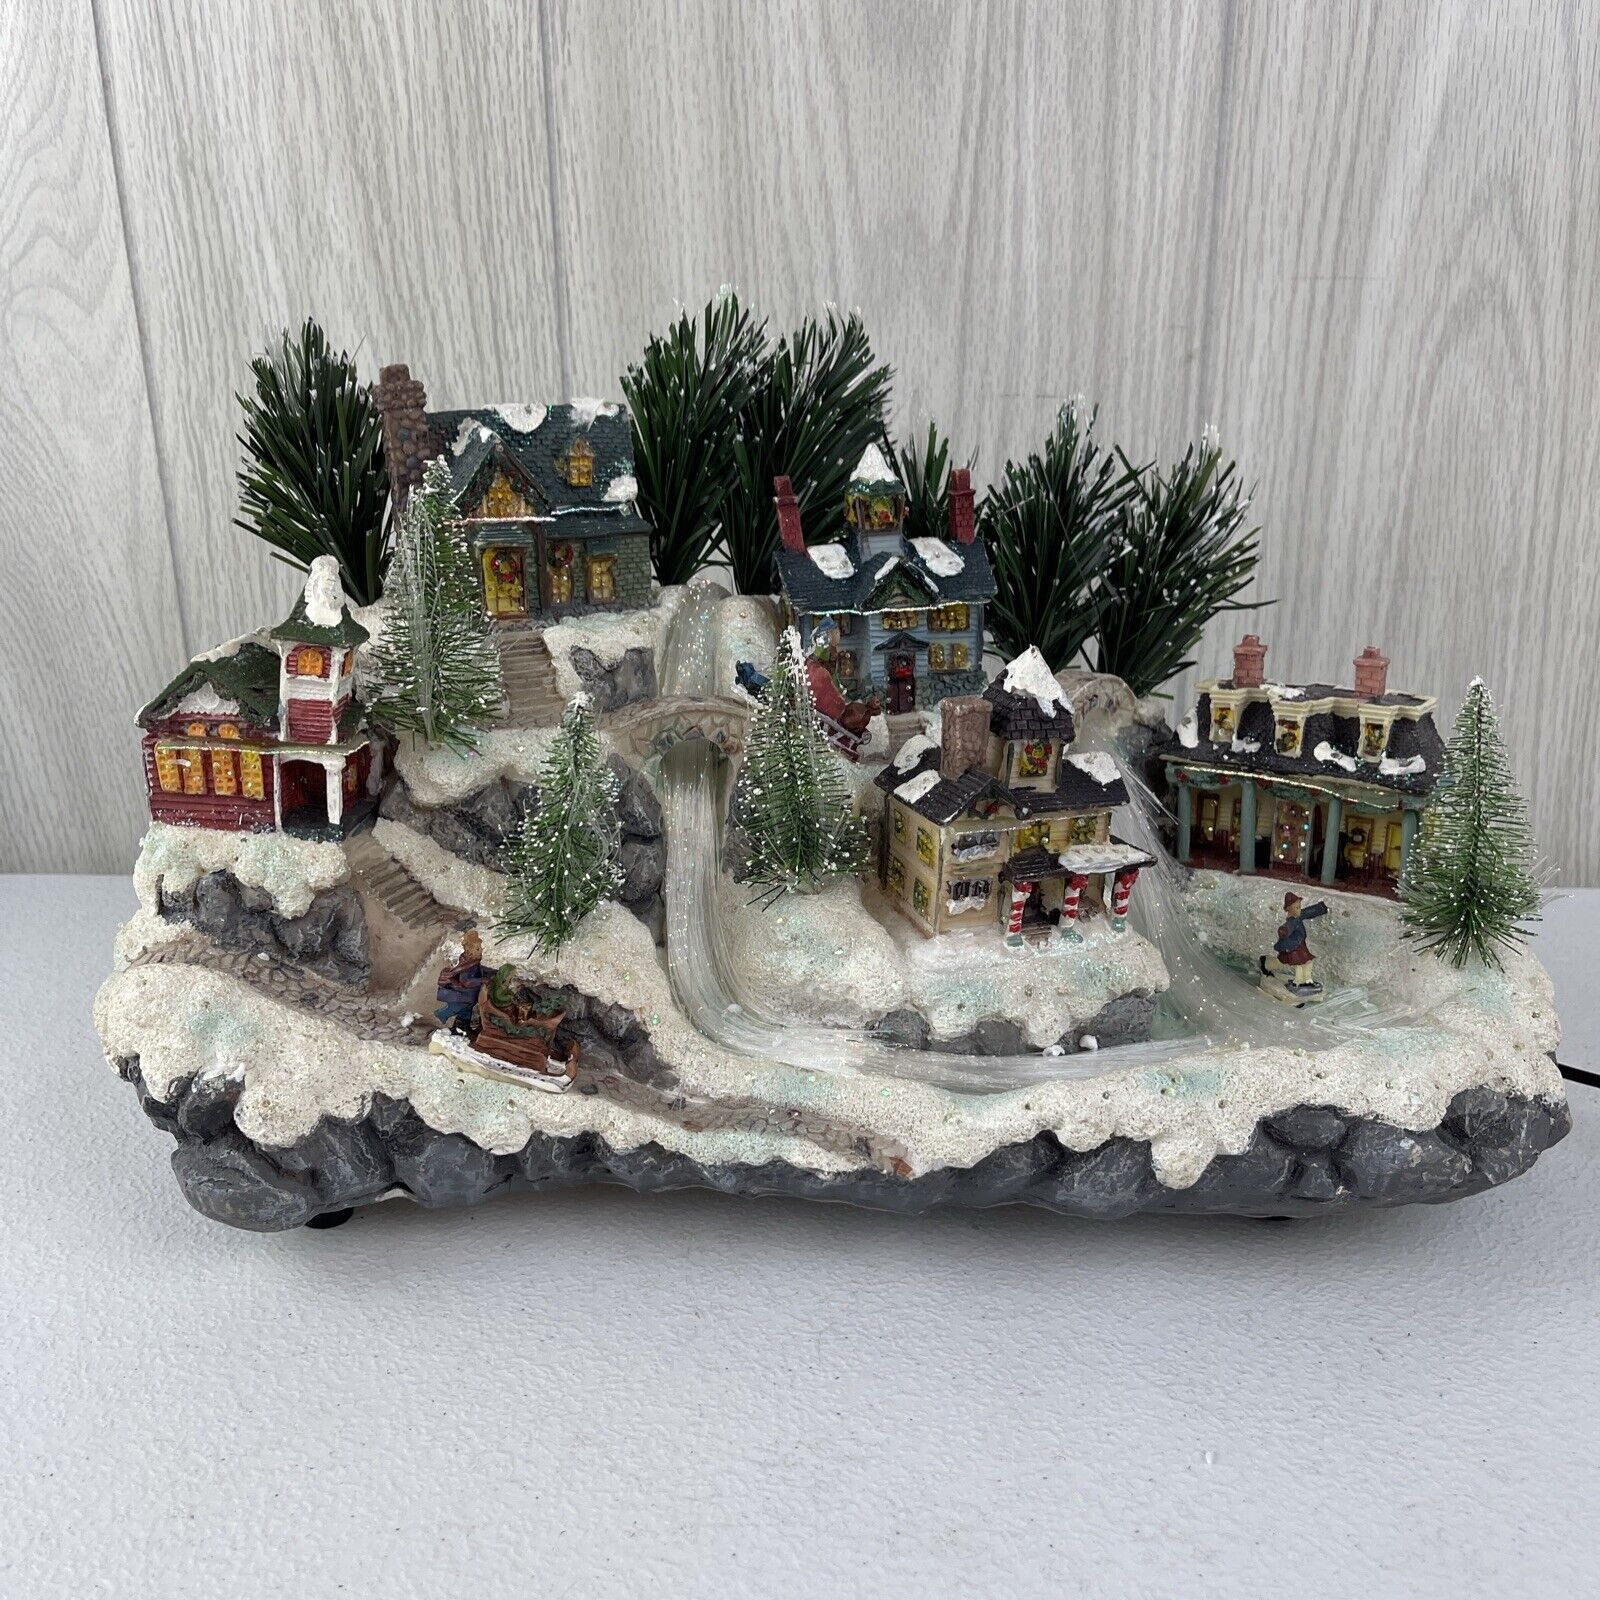 Christmas Village Fiber Optic Resin Sculpture By Puleo W/Box  Tested